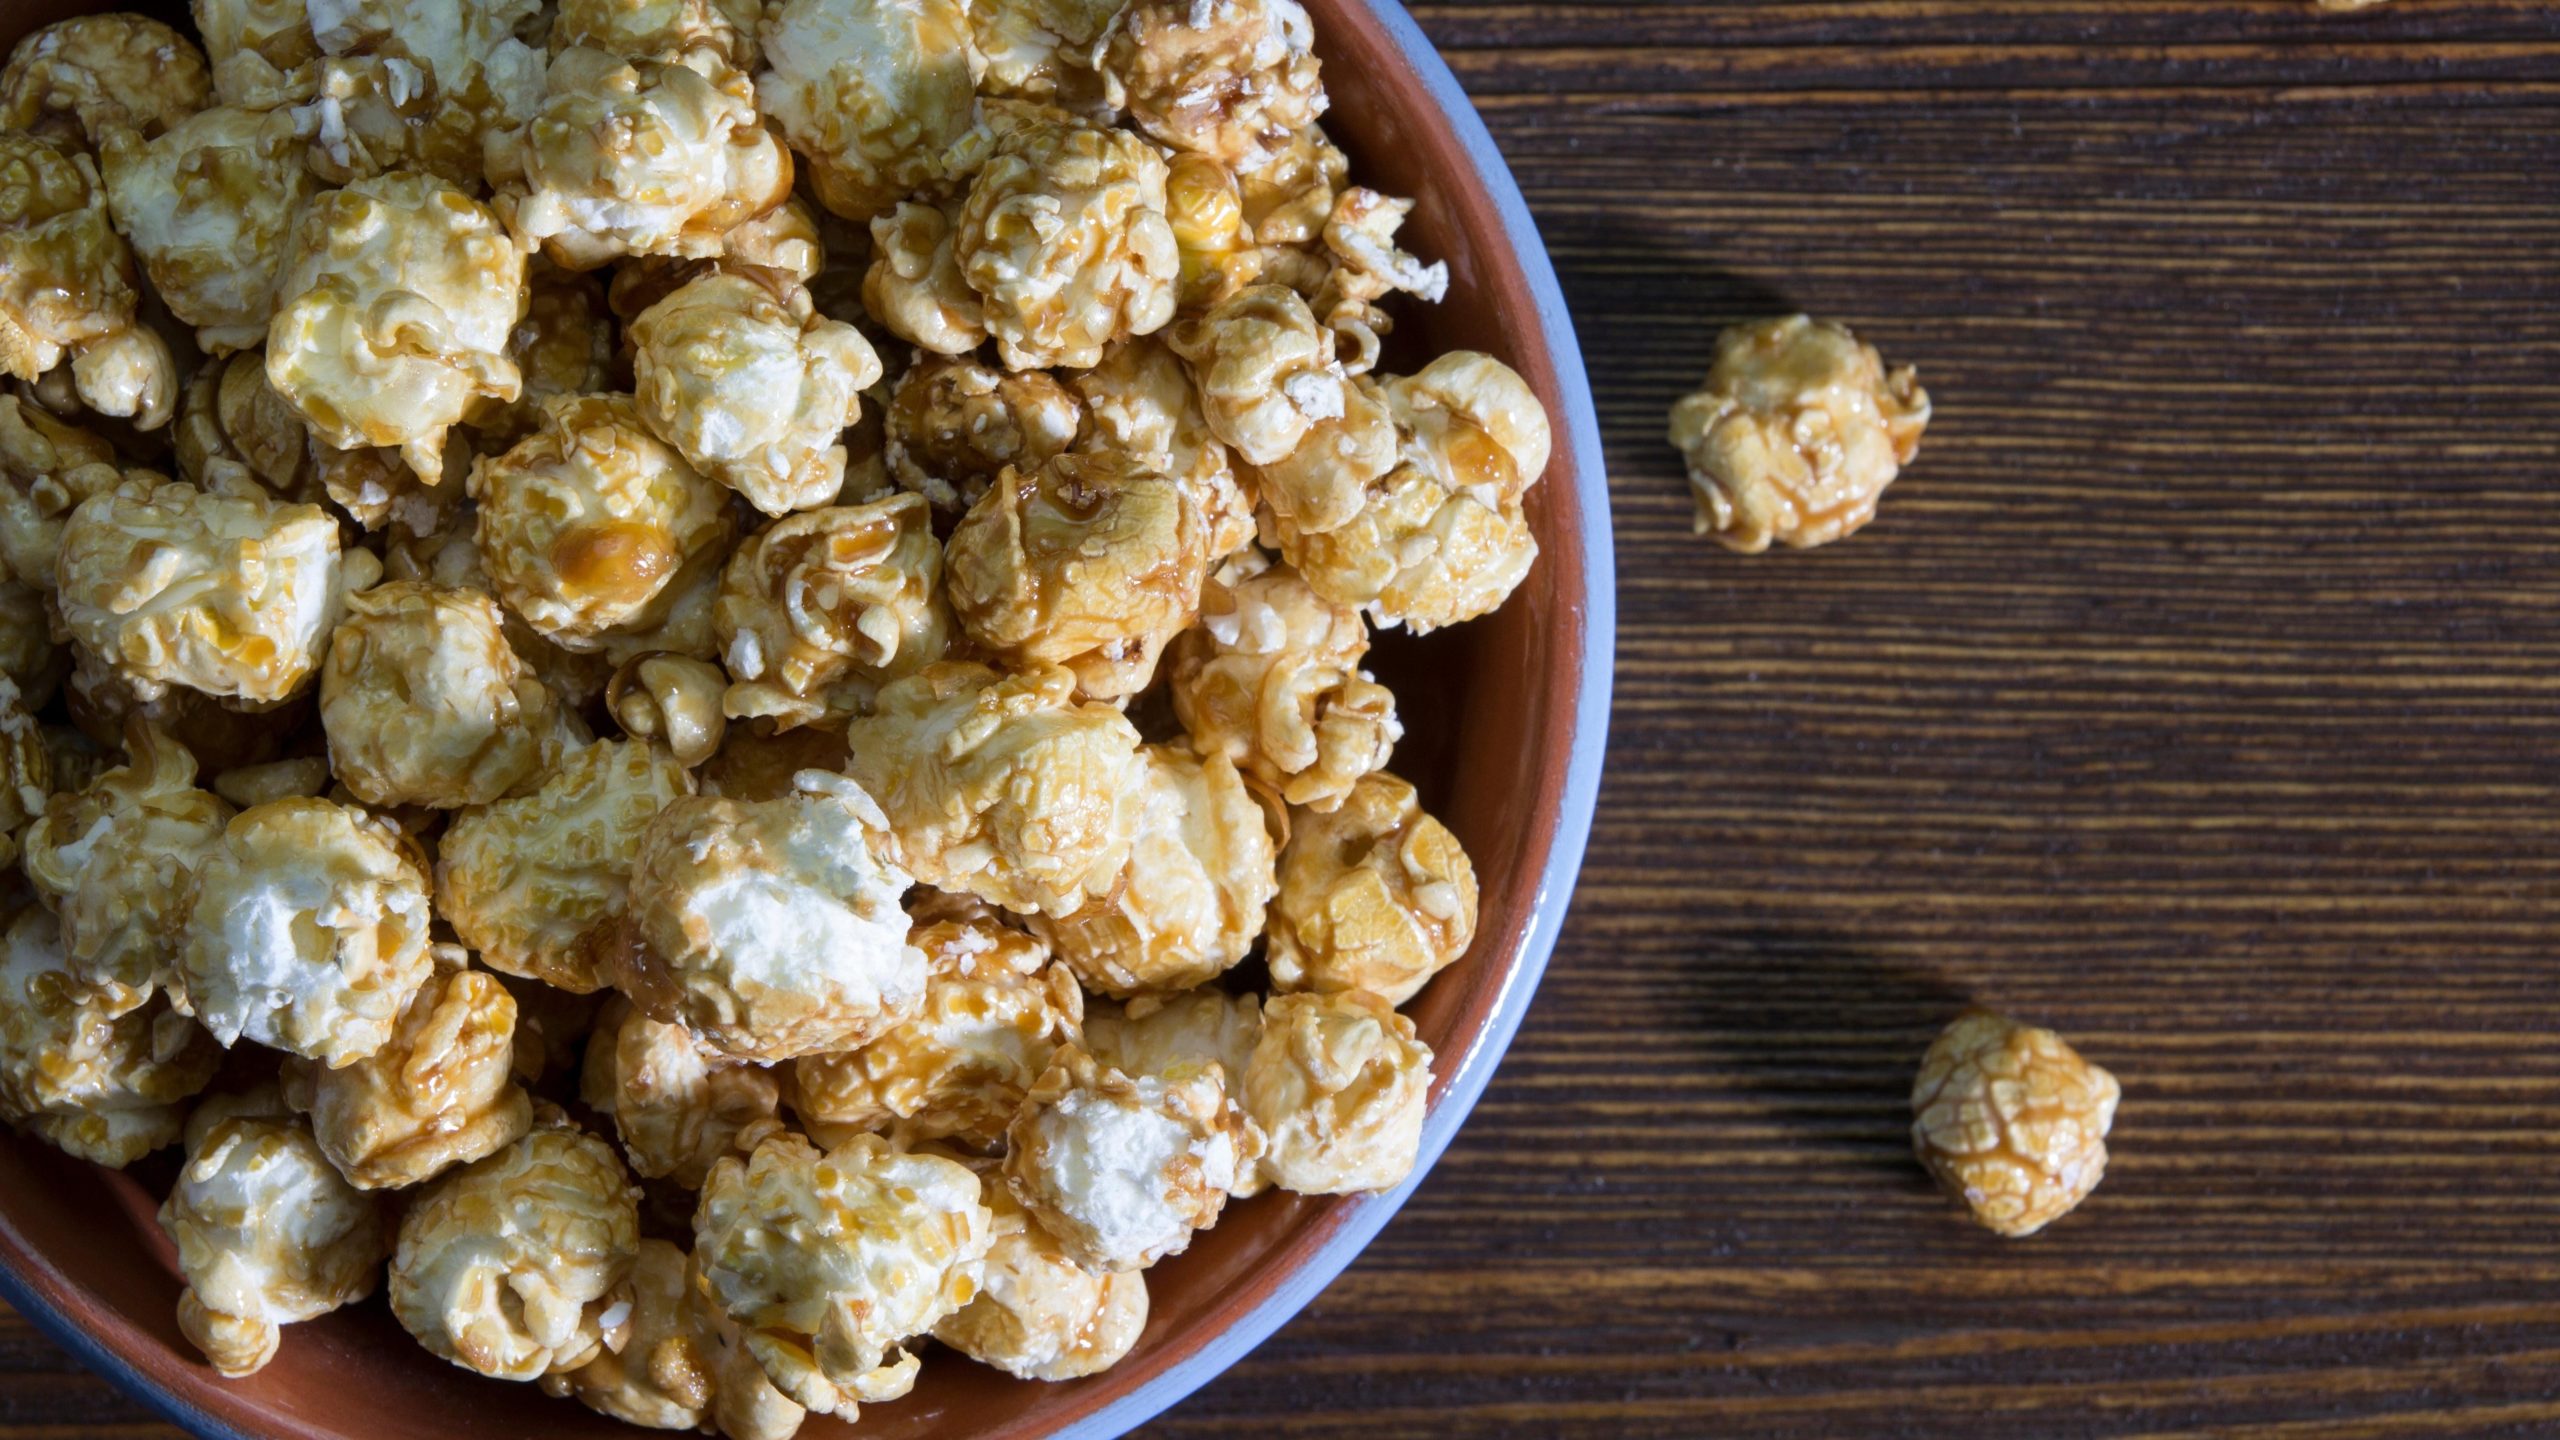 It’s Almost Too Easy to Make Your Own Kettle Corn